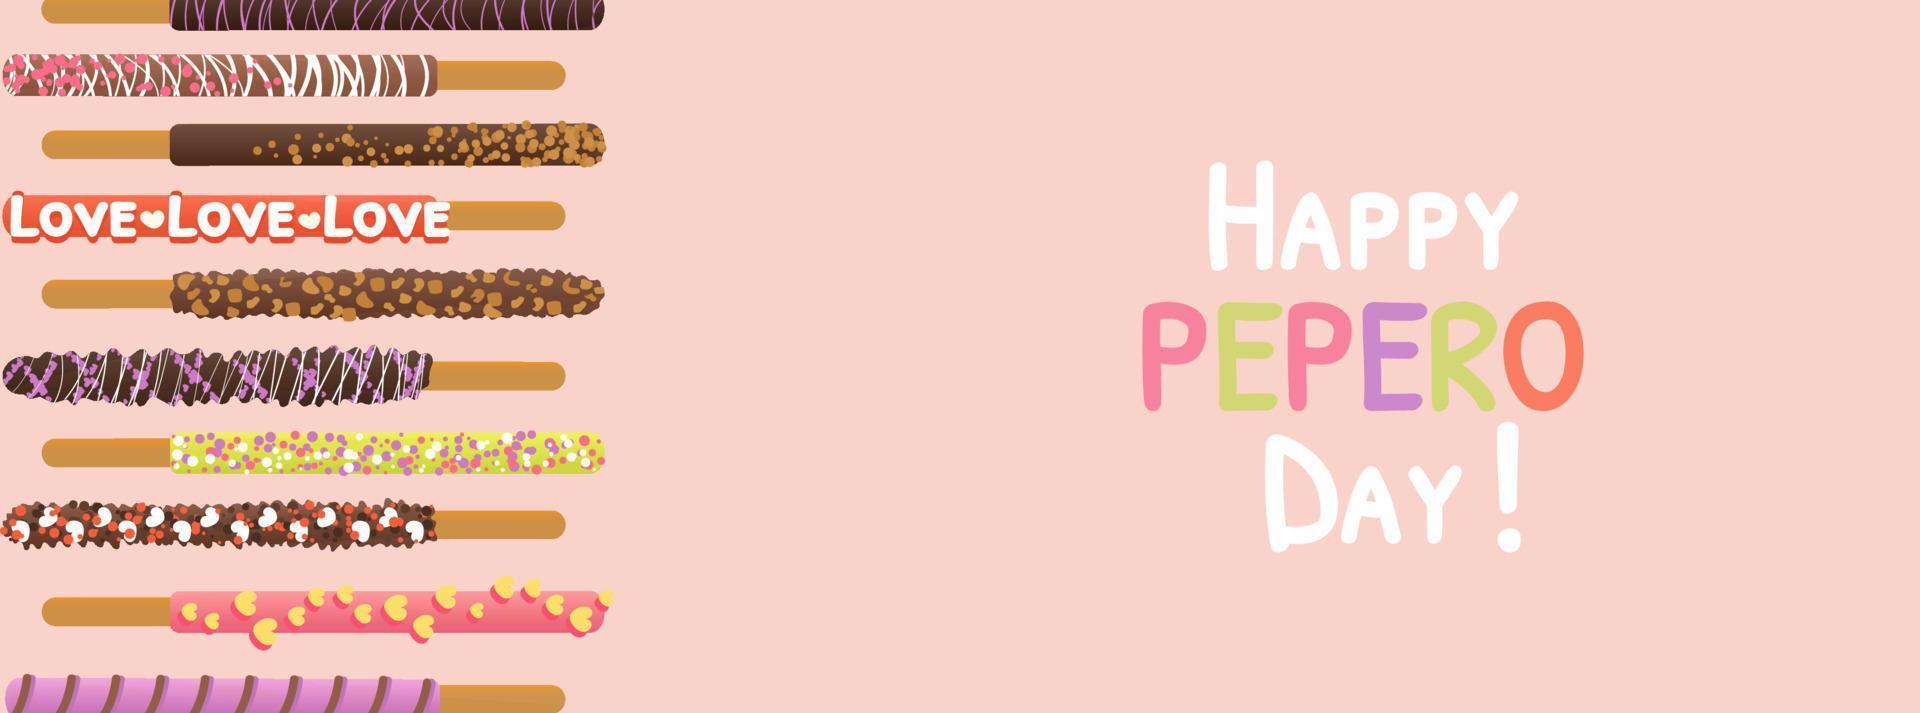 Happy pepero day background vector illustration with copy space